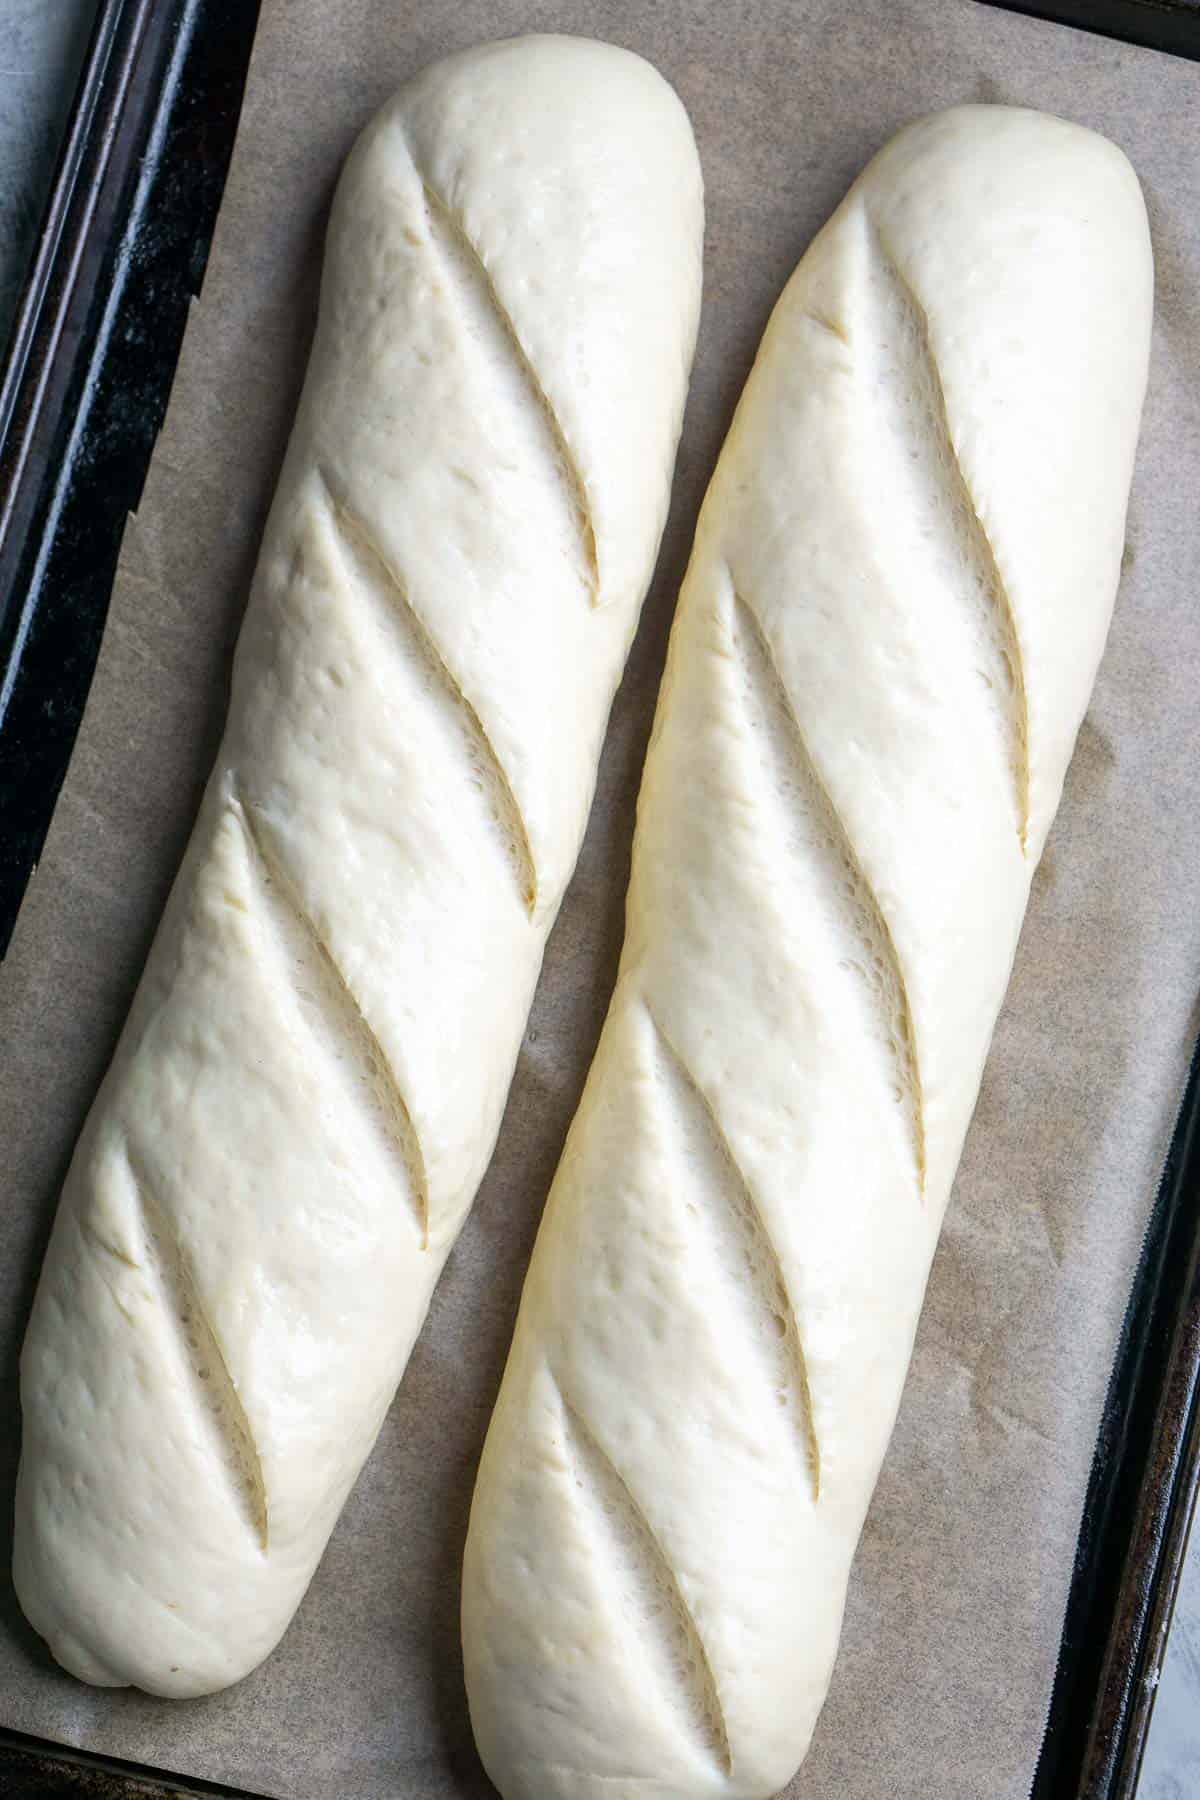 2 unbakd French loaves on parchment lined baking sheet